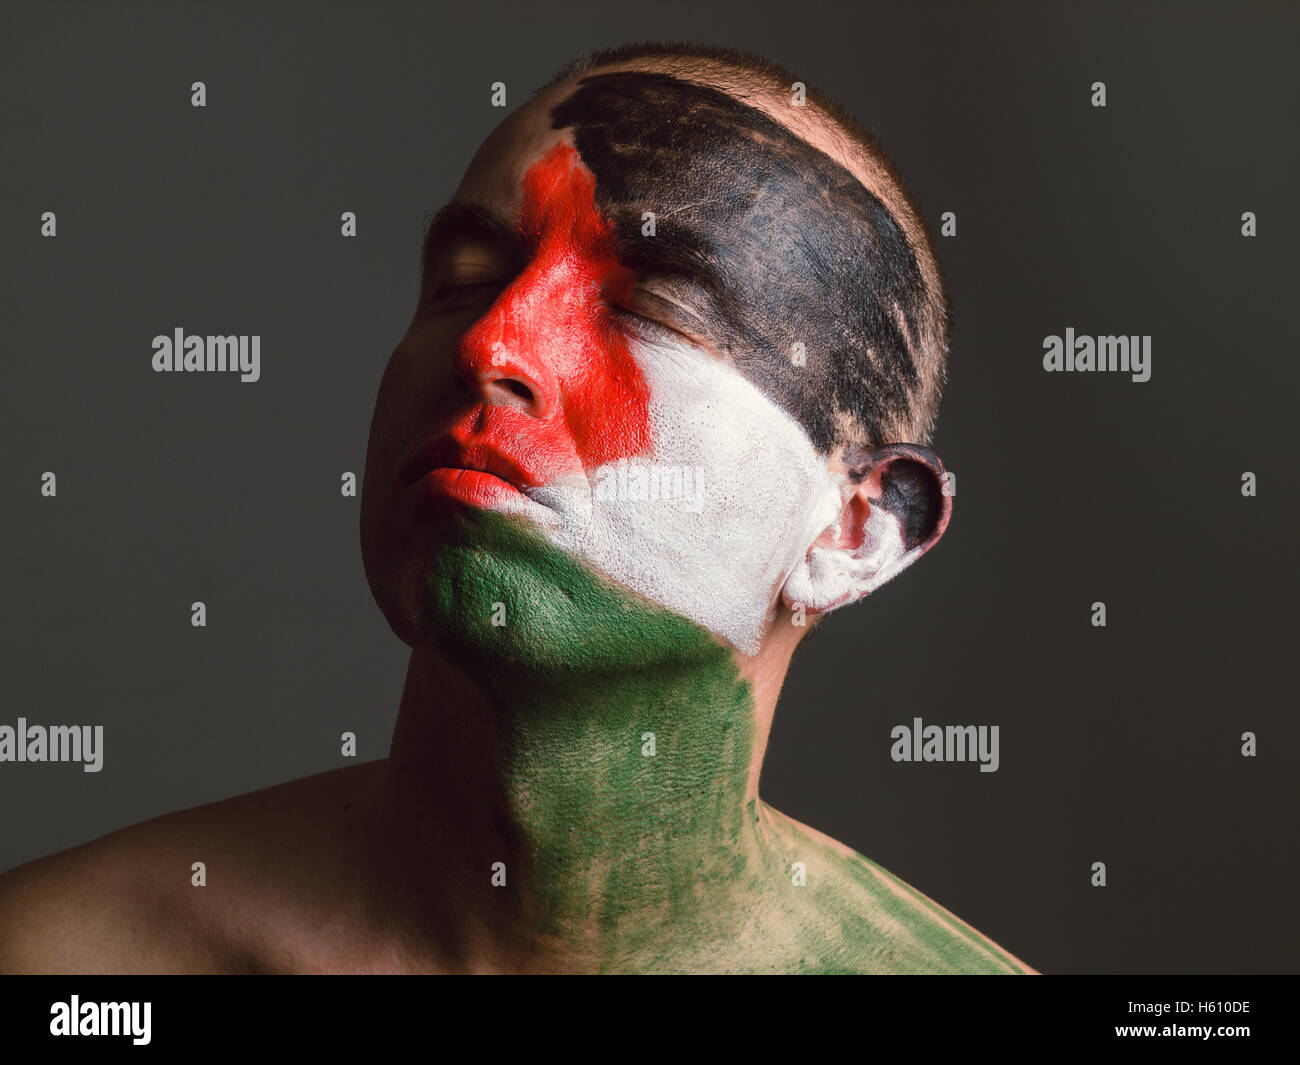 Man with his face painted with Palestinian flag. The man's eyes closed and looking sideways. Stock Photo